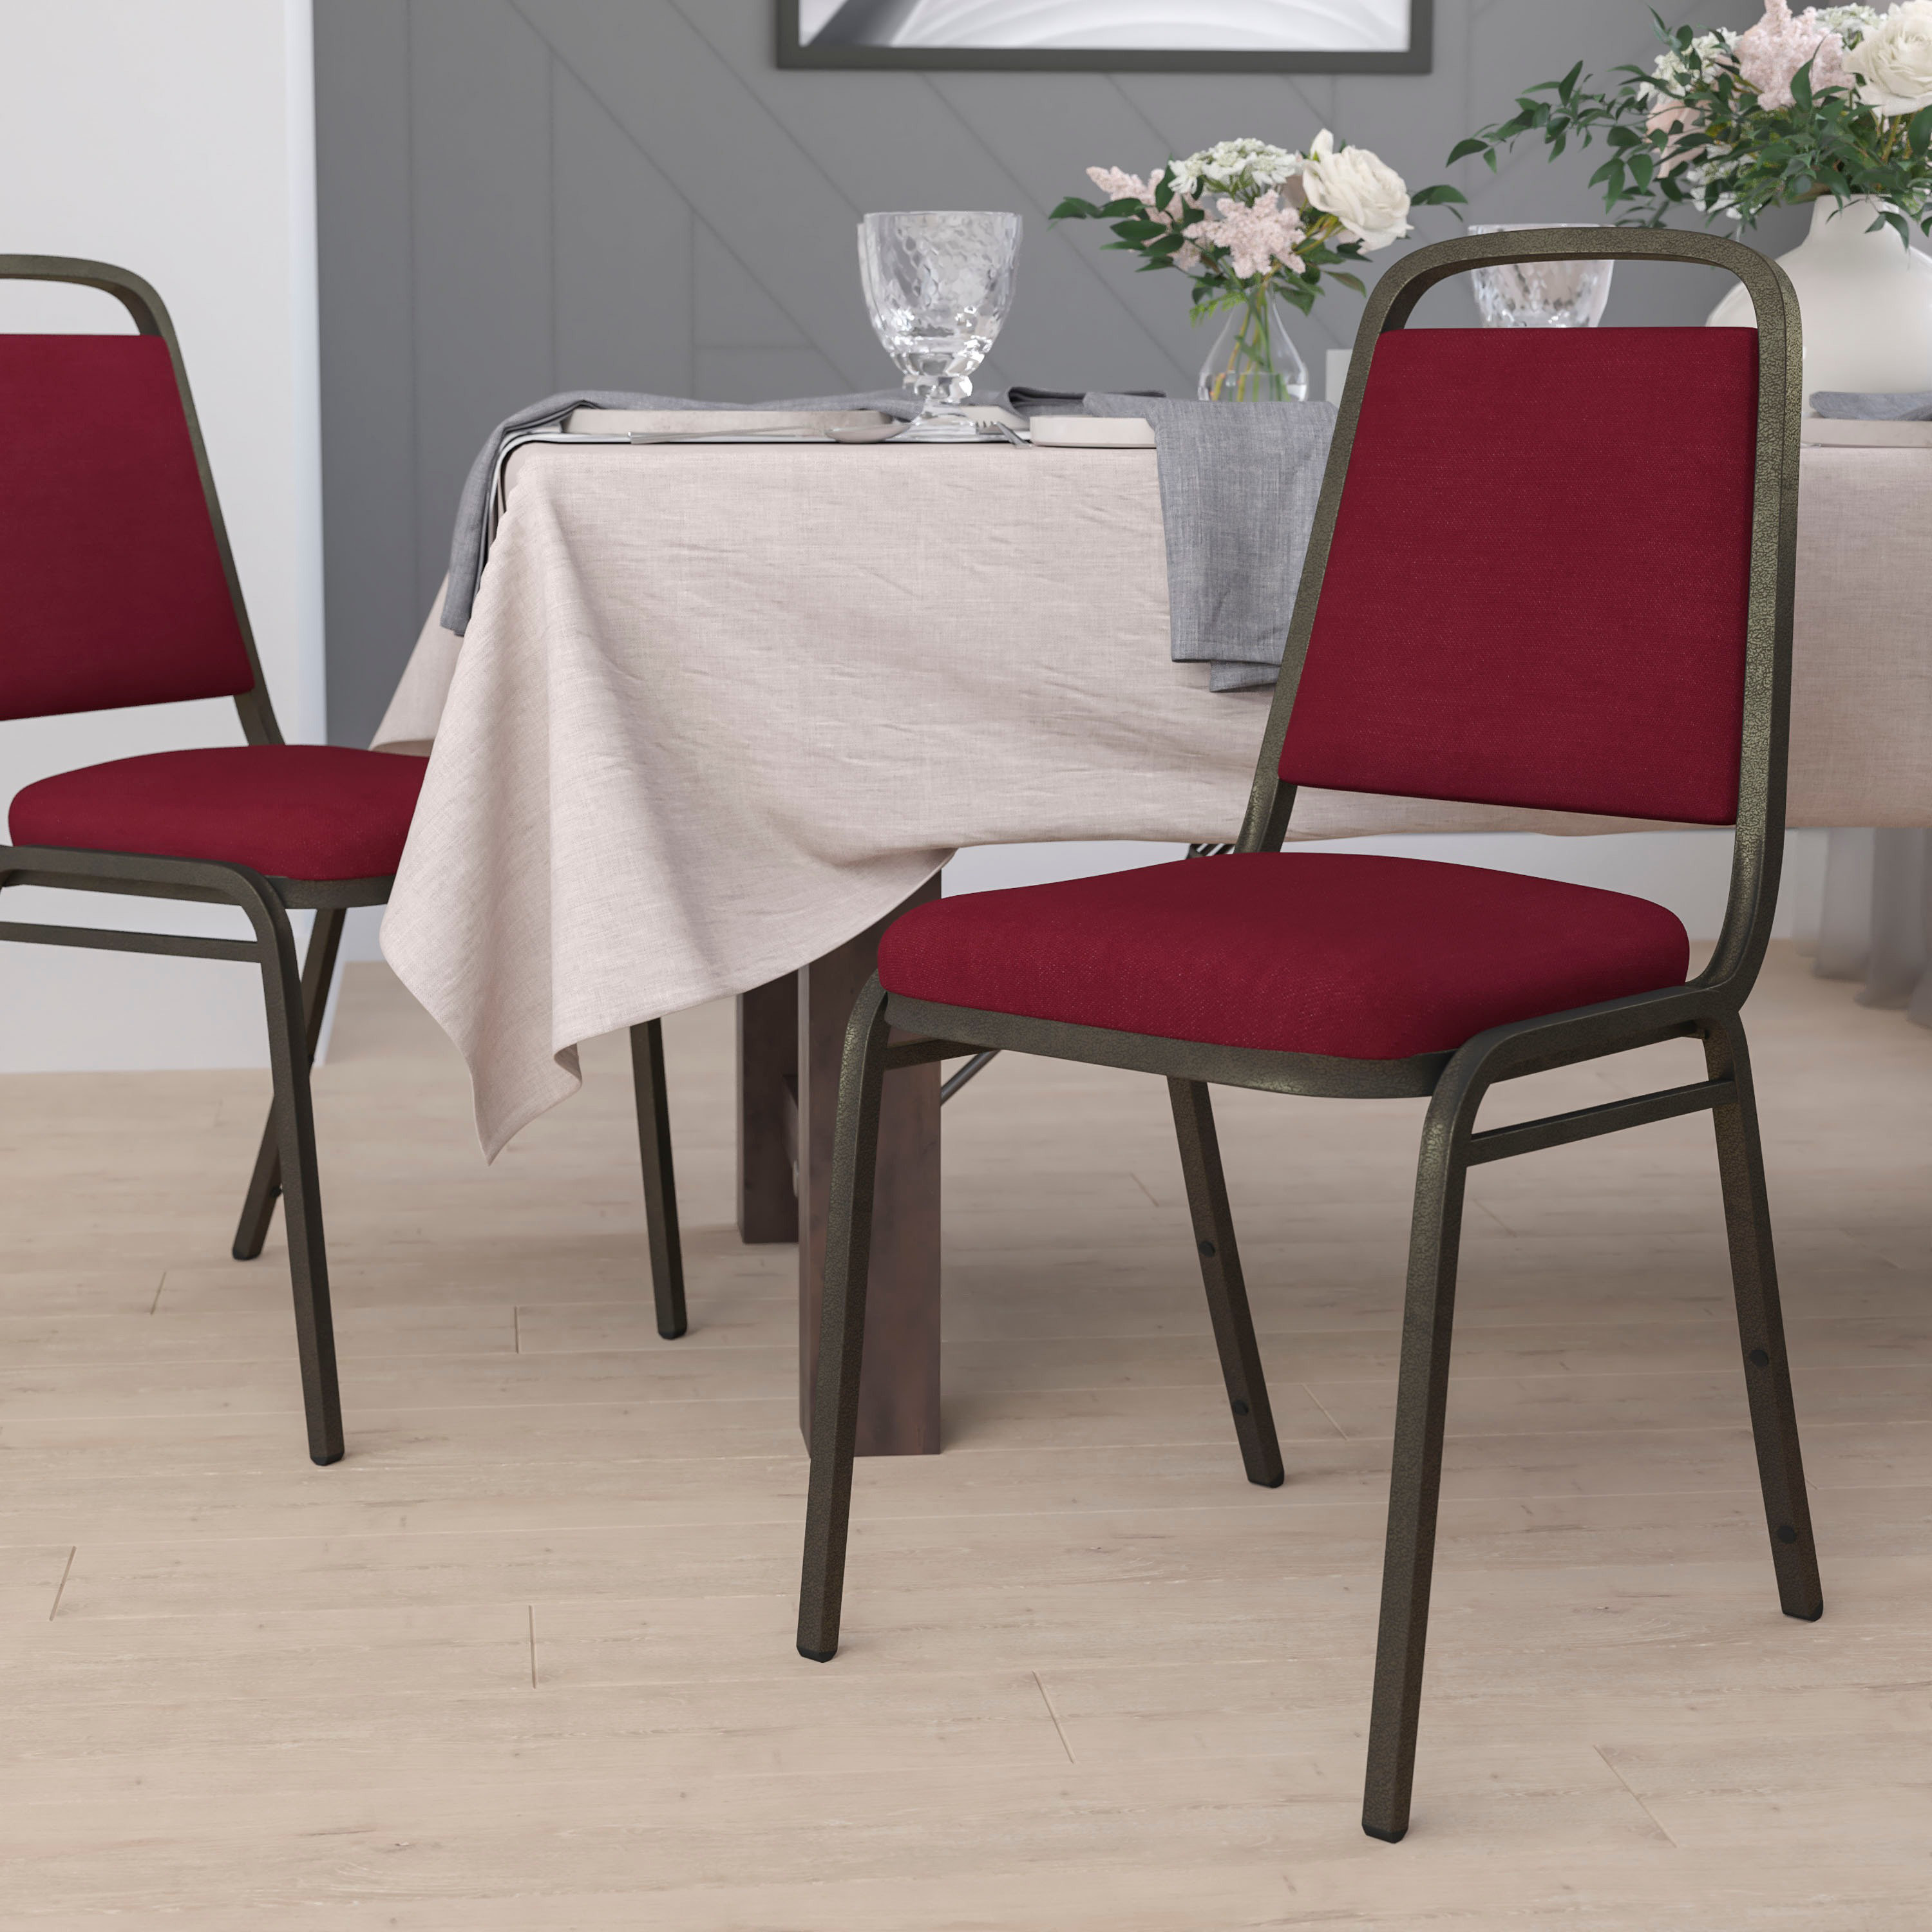 Amaya Trapezoidal Back Stacking Banquet Chair with 1.5 Thick Seat